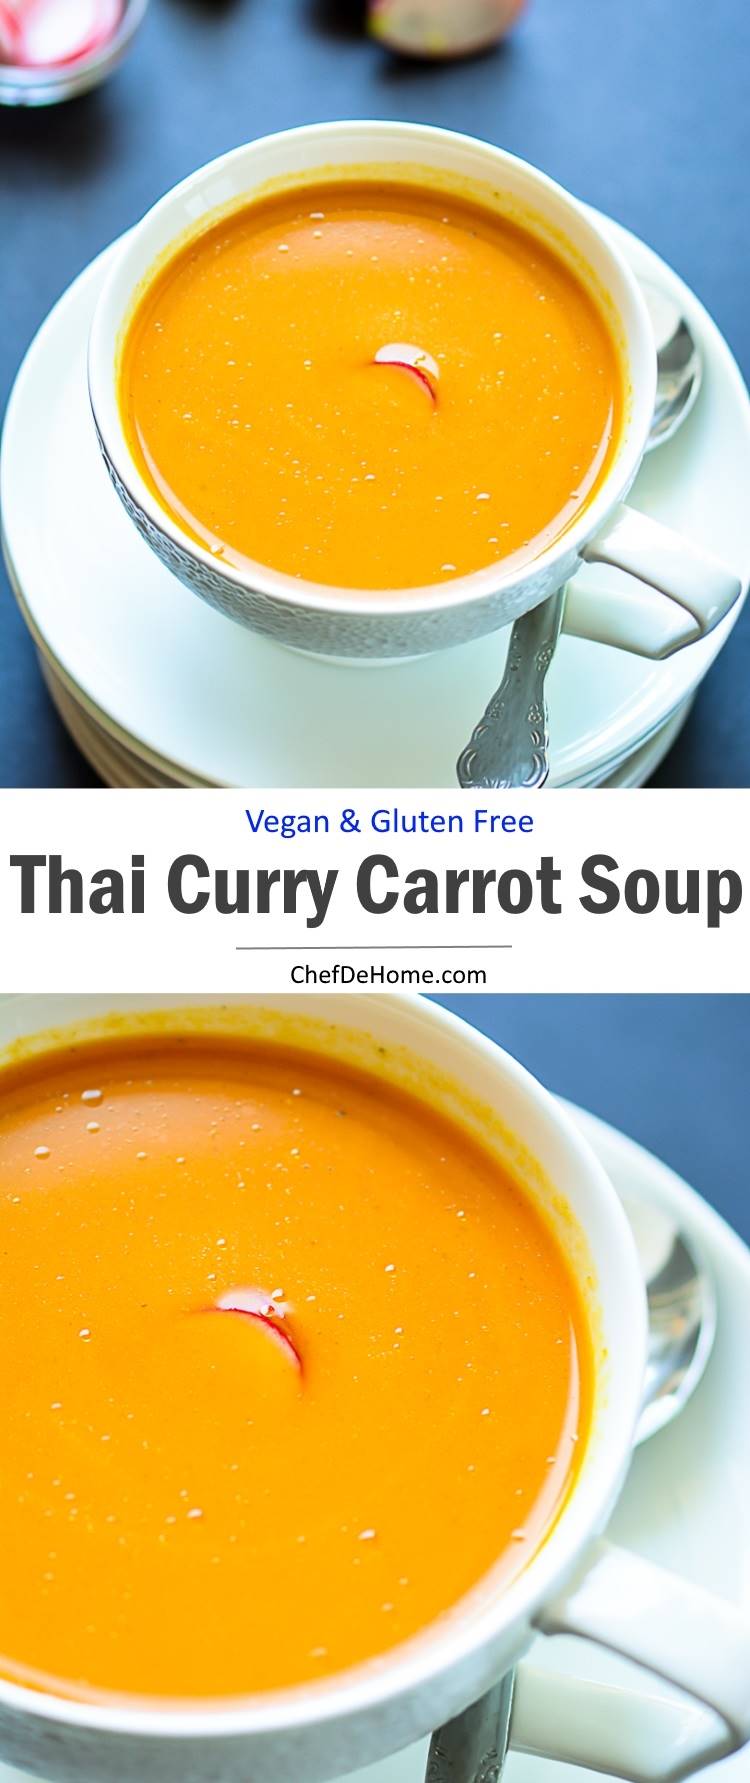 Easy Vegan Thai Curry Carrot Soup with Coconut Milk and all Fresh Ingredients | chefdehome.com